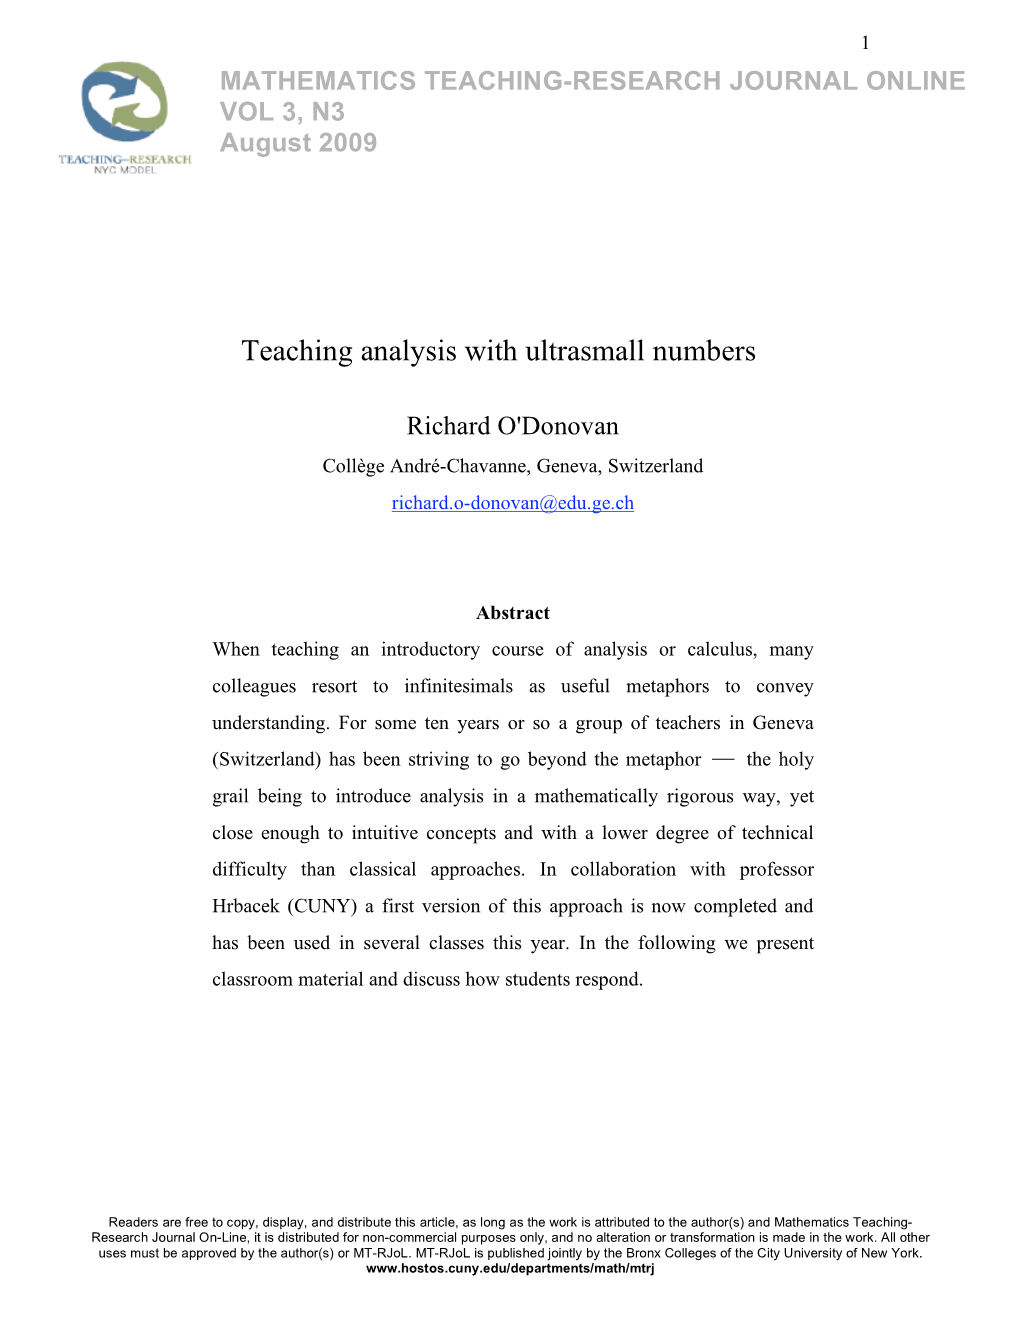 Teaching Analysis with Ultrasmall Numbers